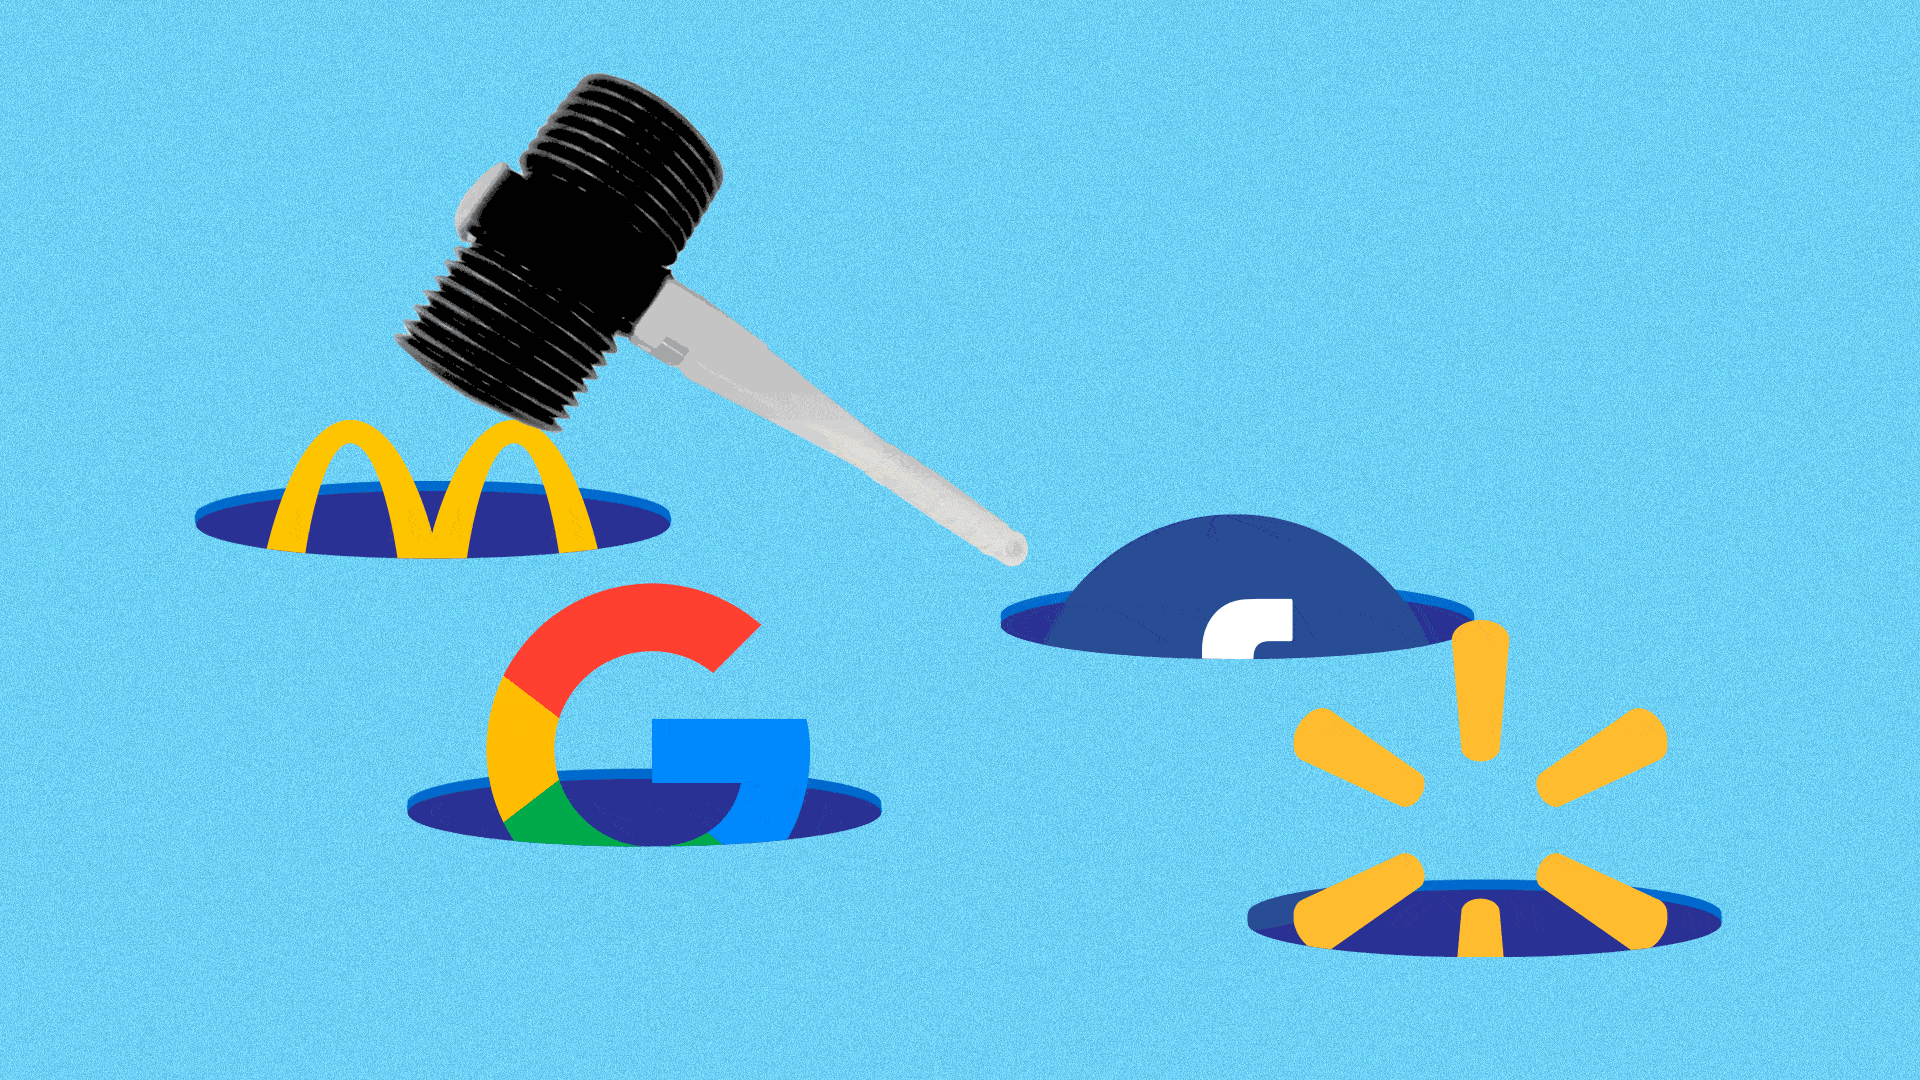 Animated illustration of a whack-a-mole carnival game with the logos for Google, Facebook, McDonald's and Walmart all bobbing up and down while a hammer hovers abov